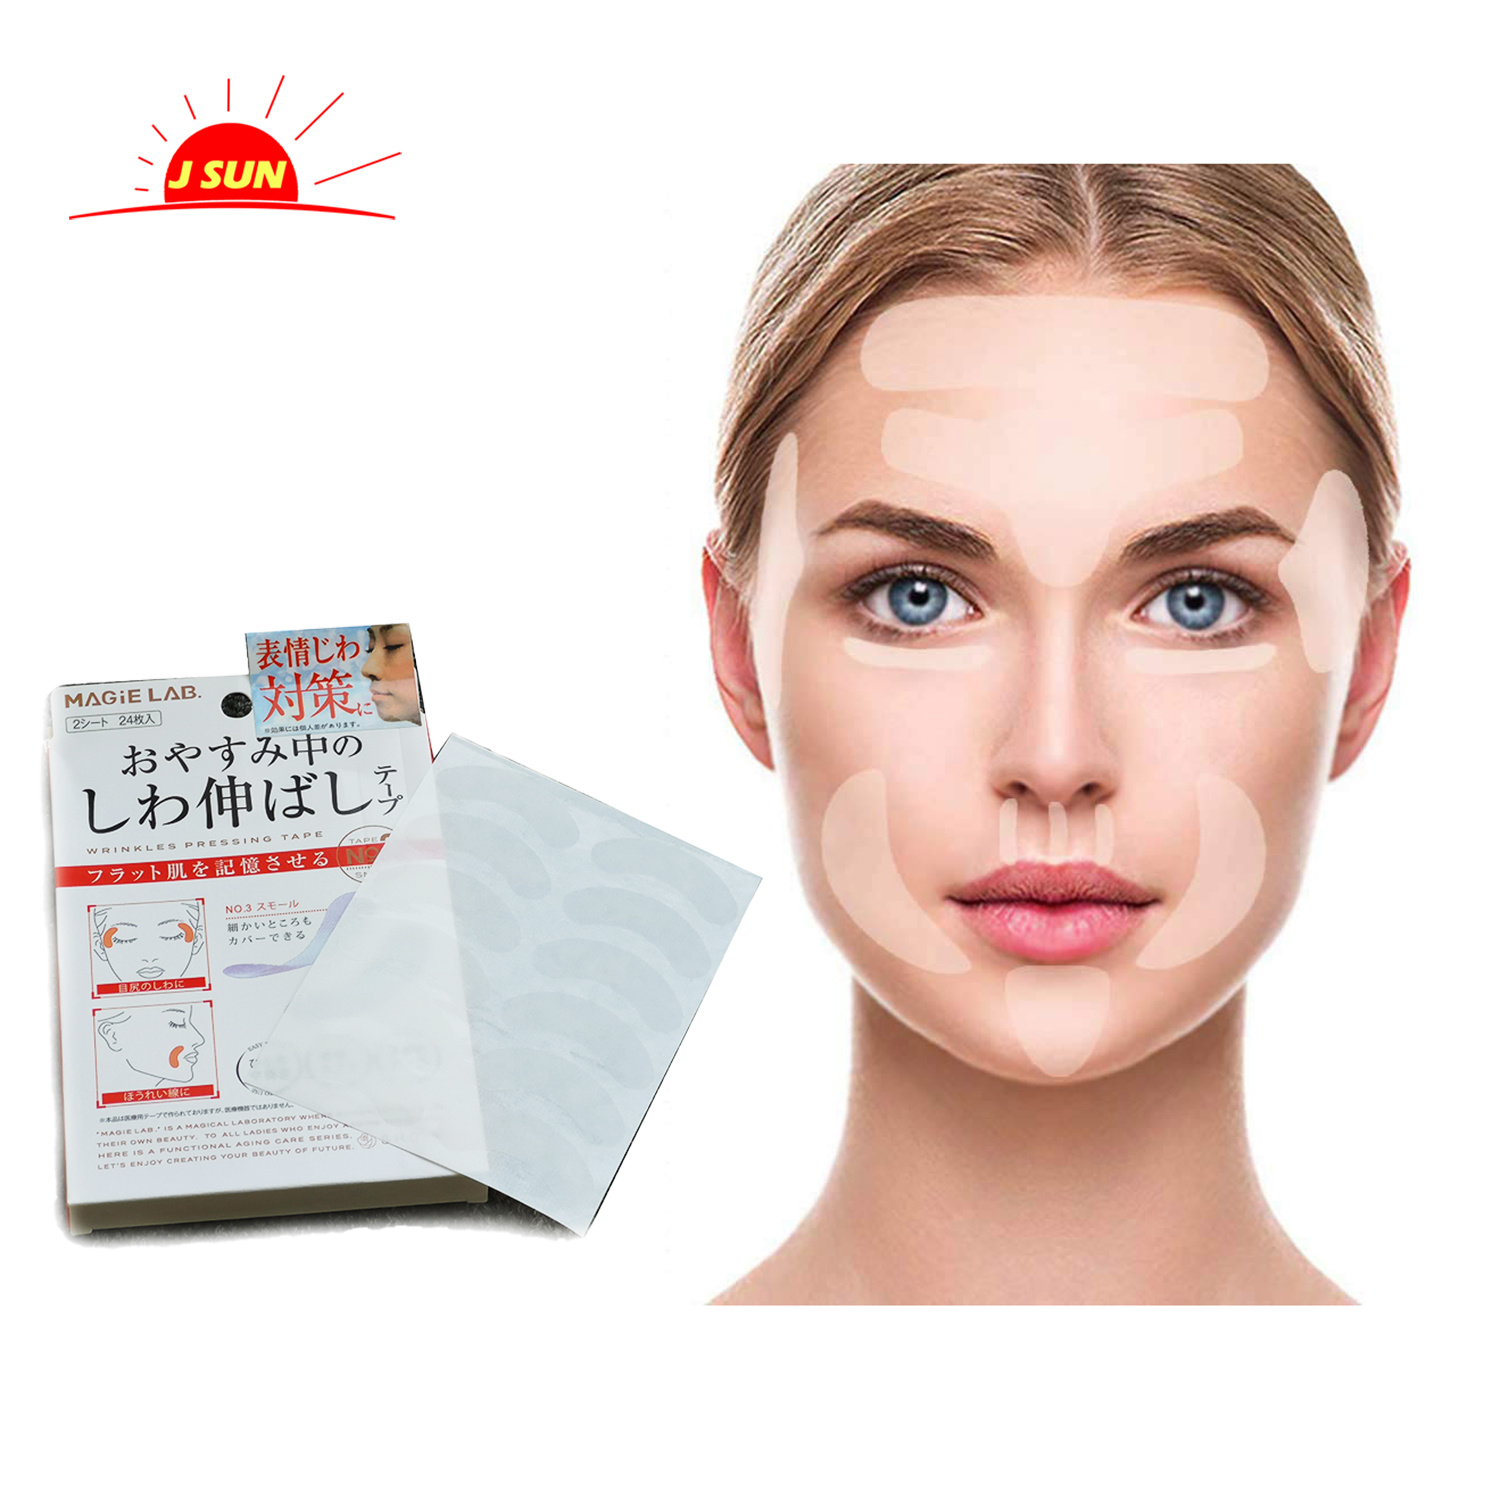 Face smoothing patch